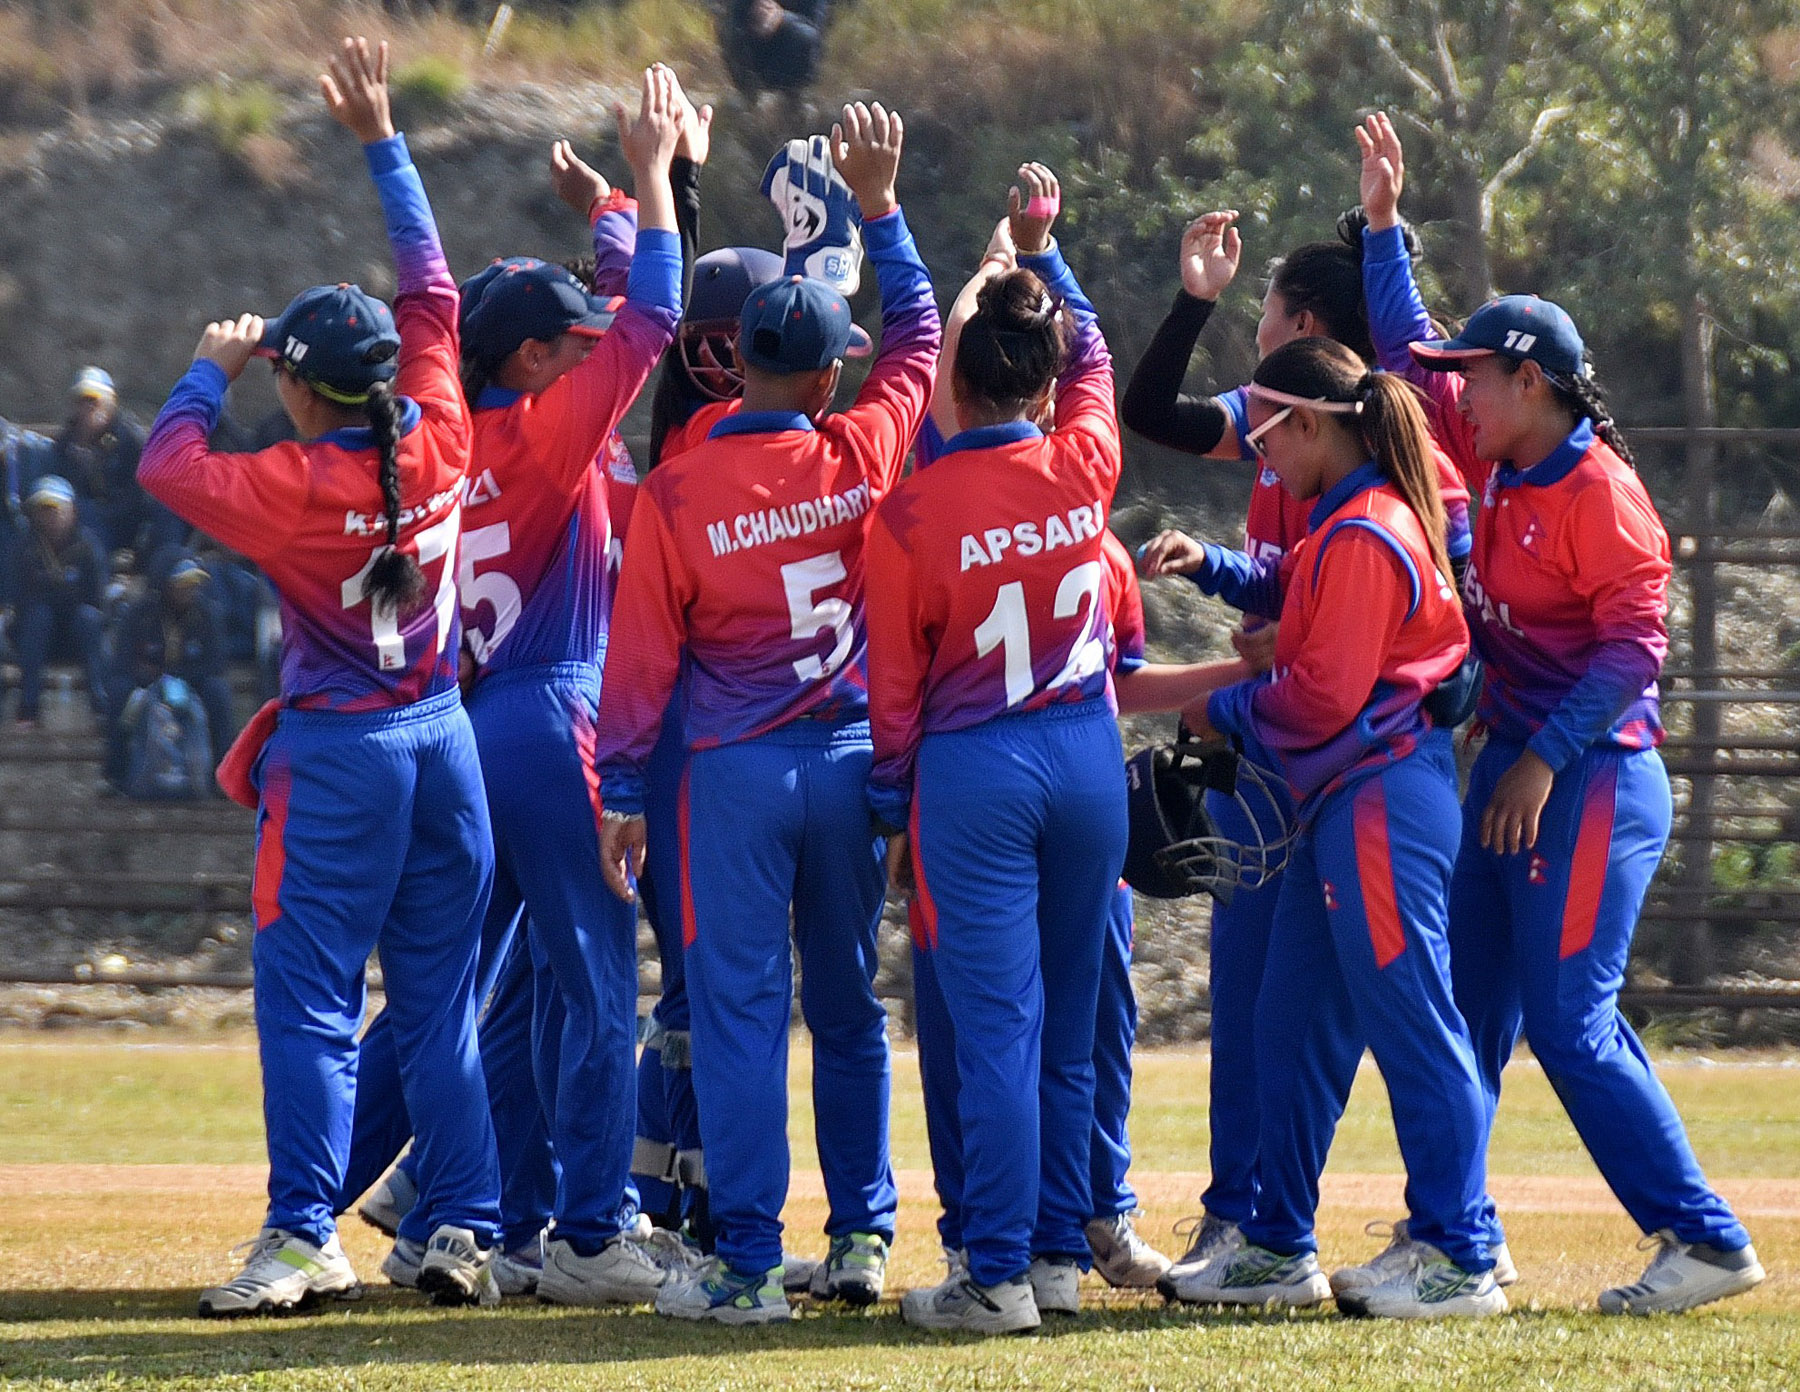 SAG 2019: Nepal routs Maldives by 10 wickets